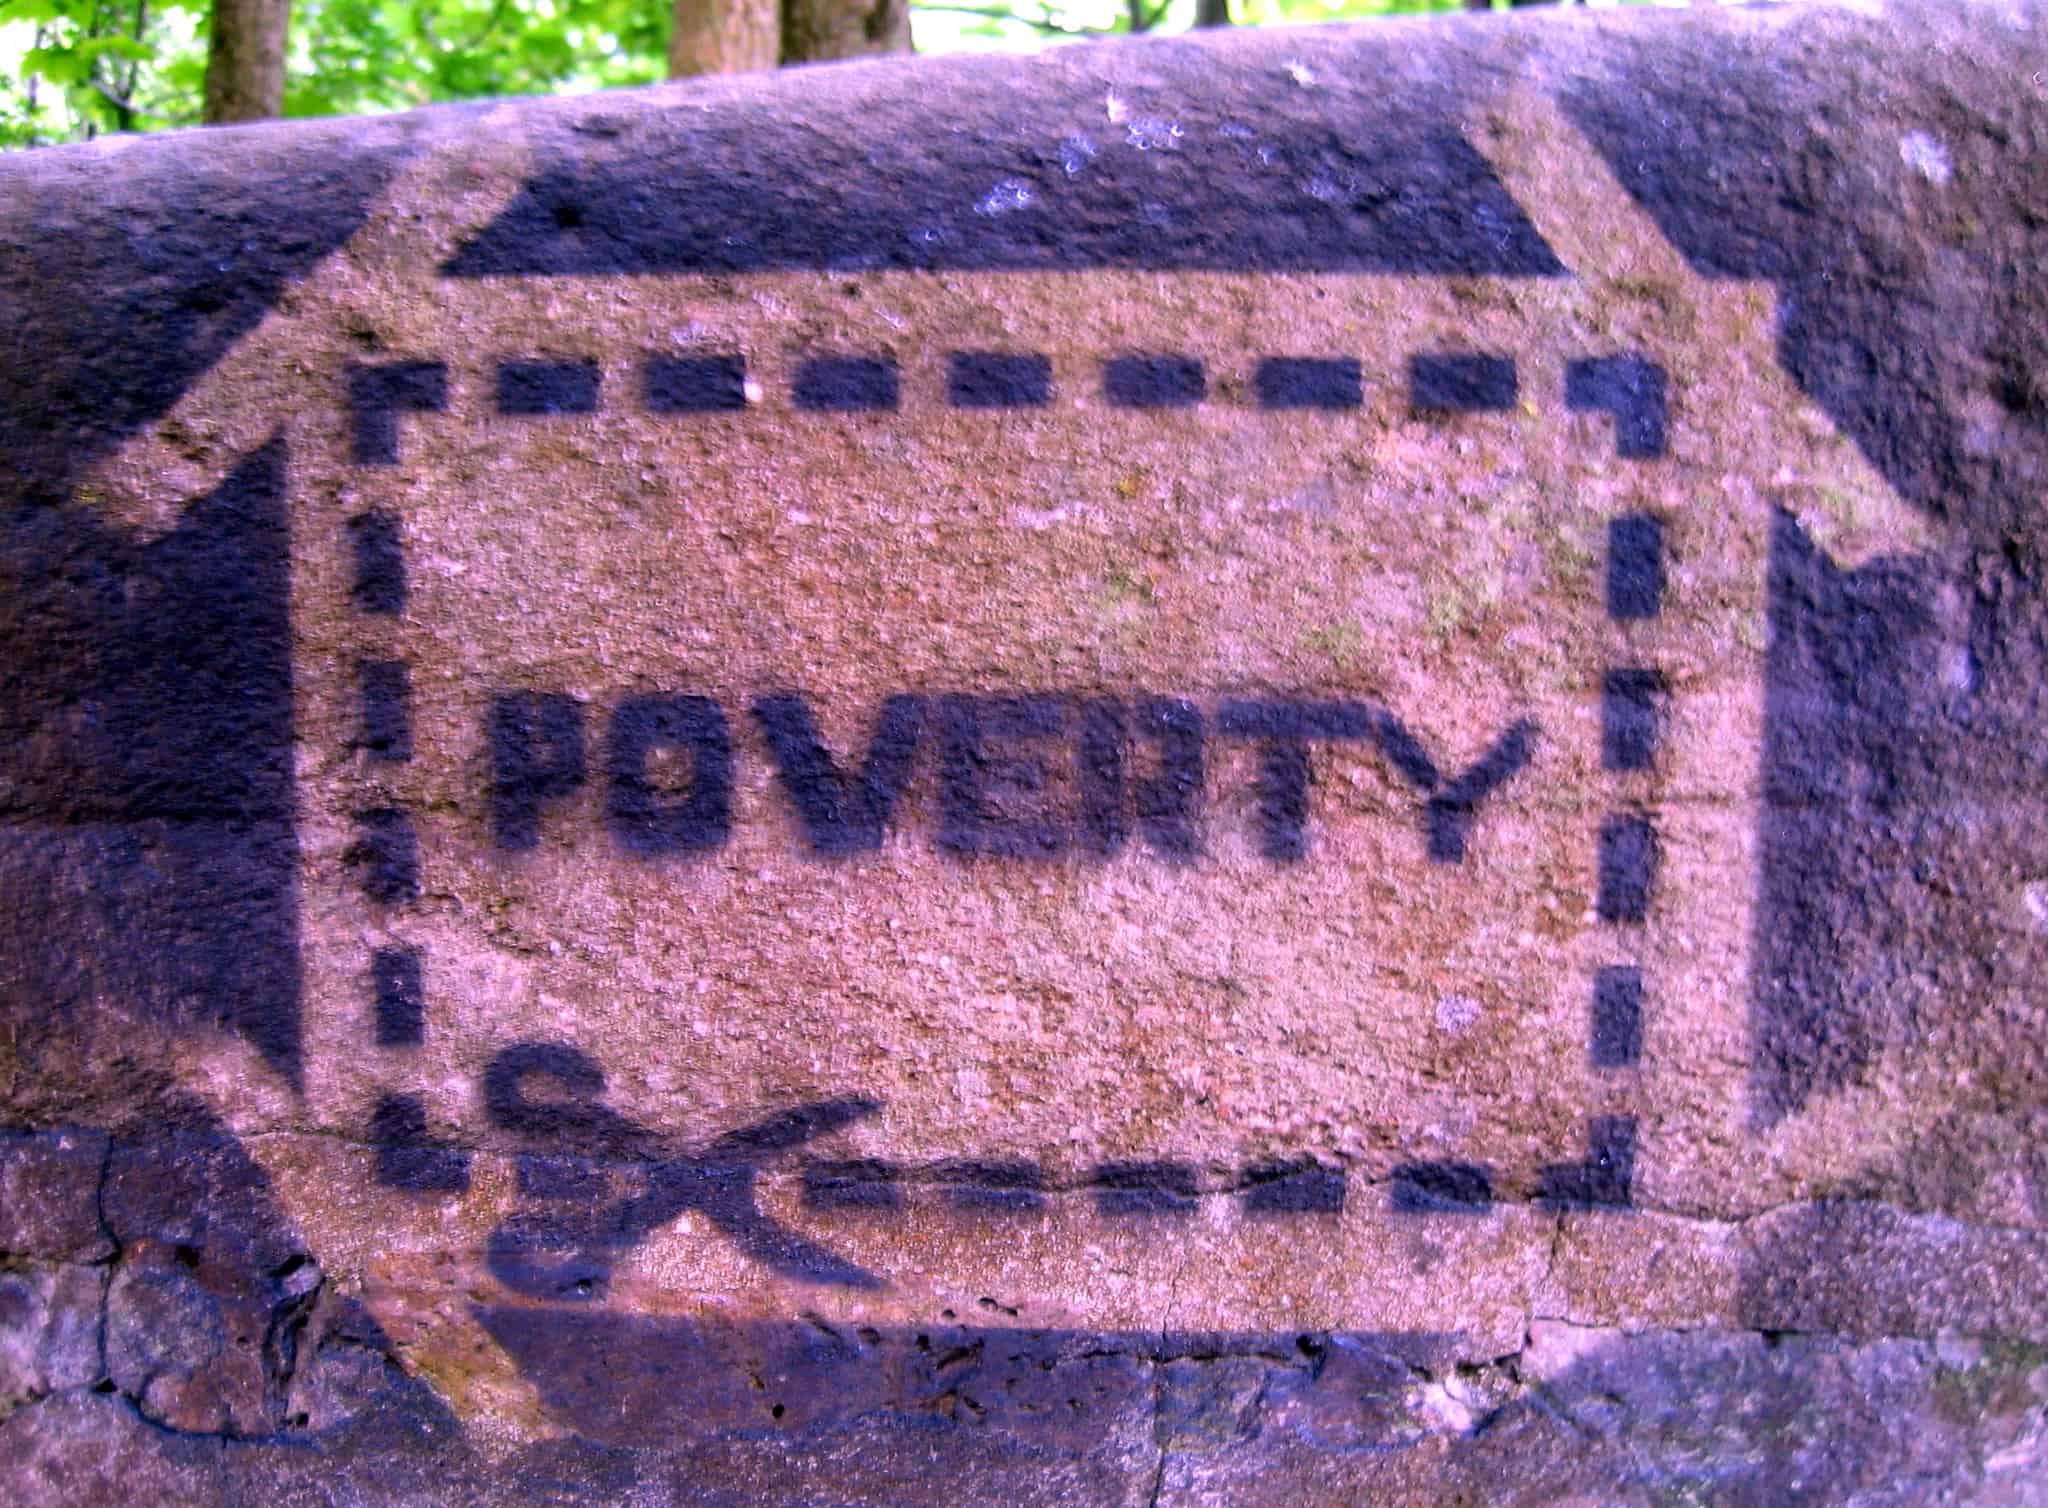 poverty stencil painted on wall